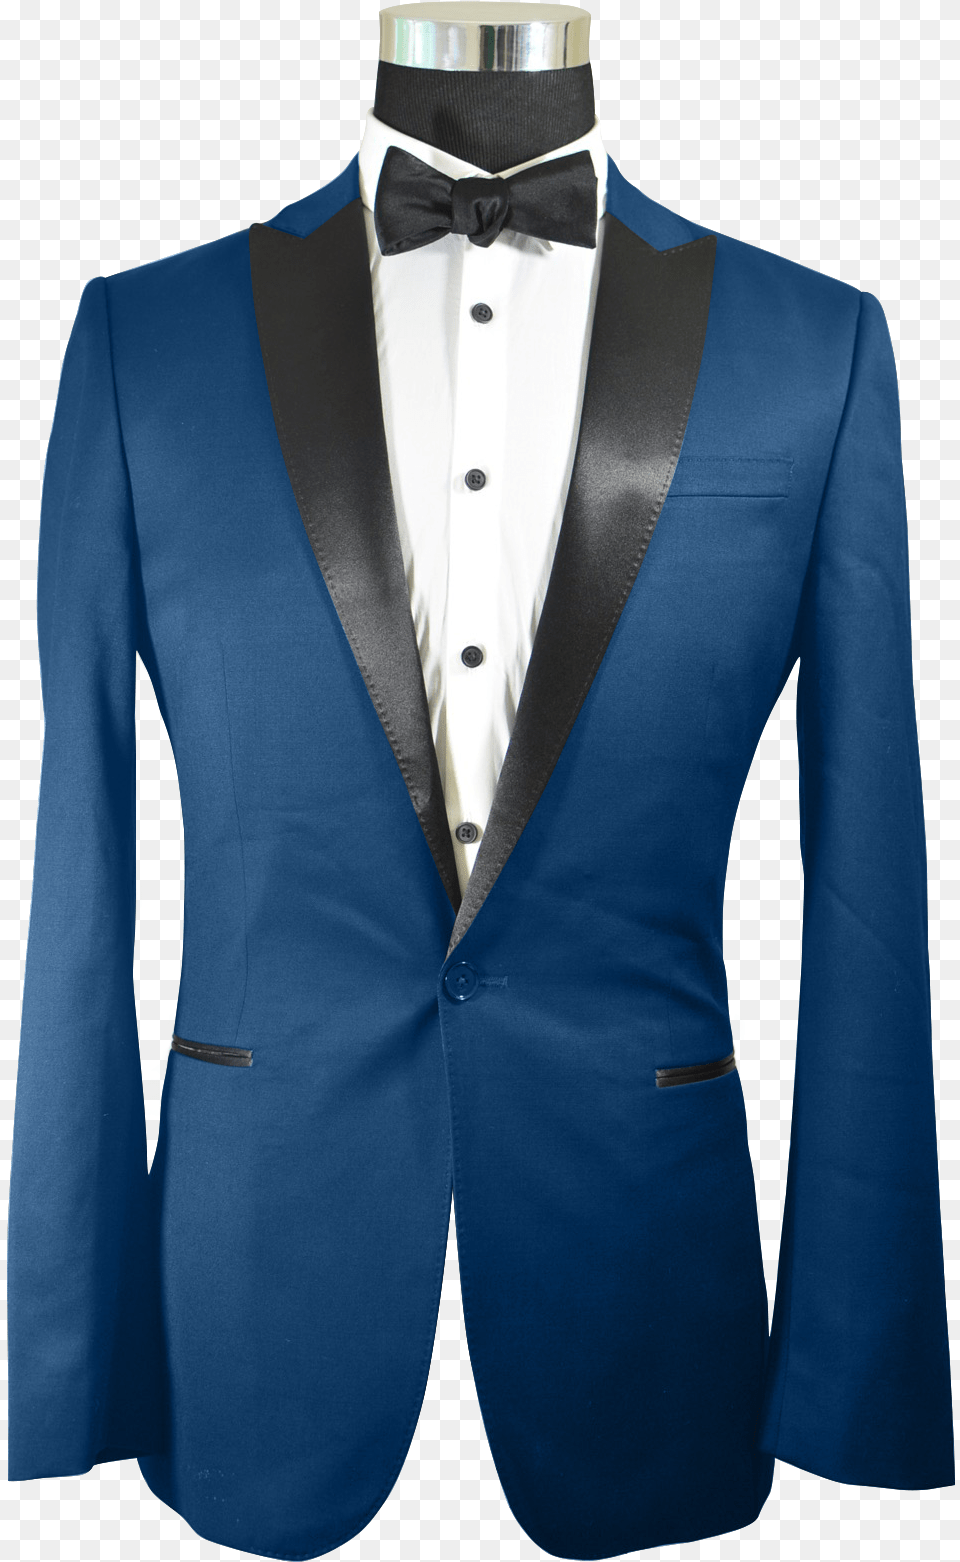 The Regal Navy Blue Tuxedoclass Tuxedo Photo, Accessories, Clothing, Formal Wear, Suit Free Transparent Png